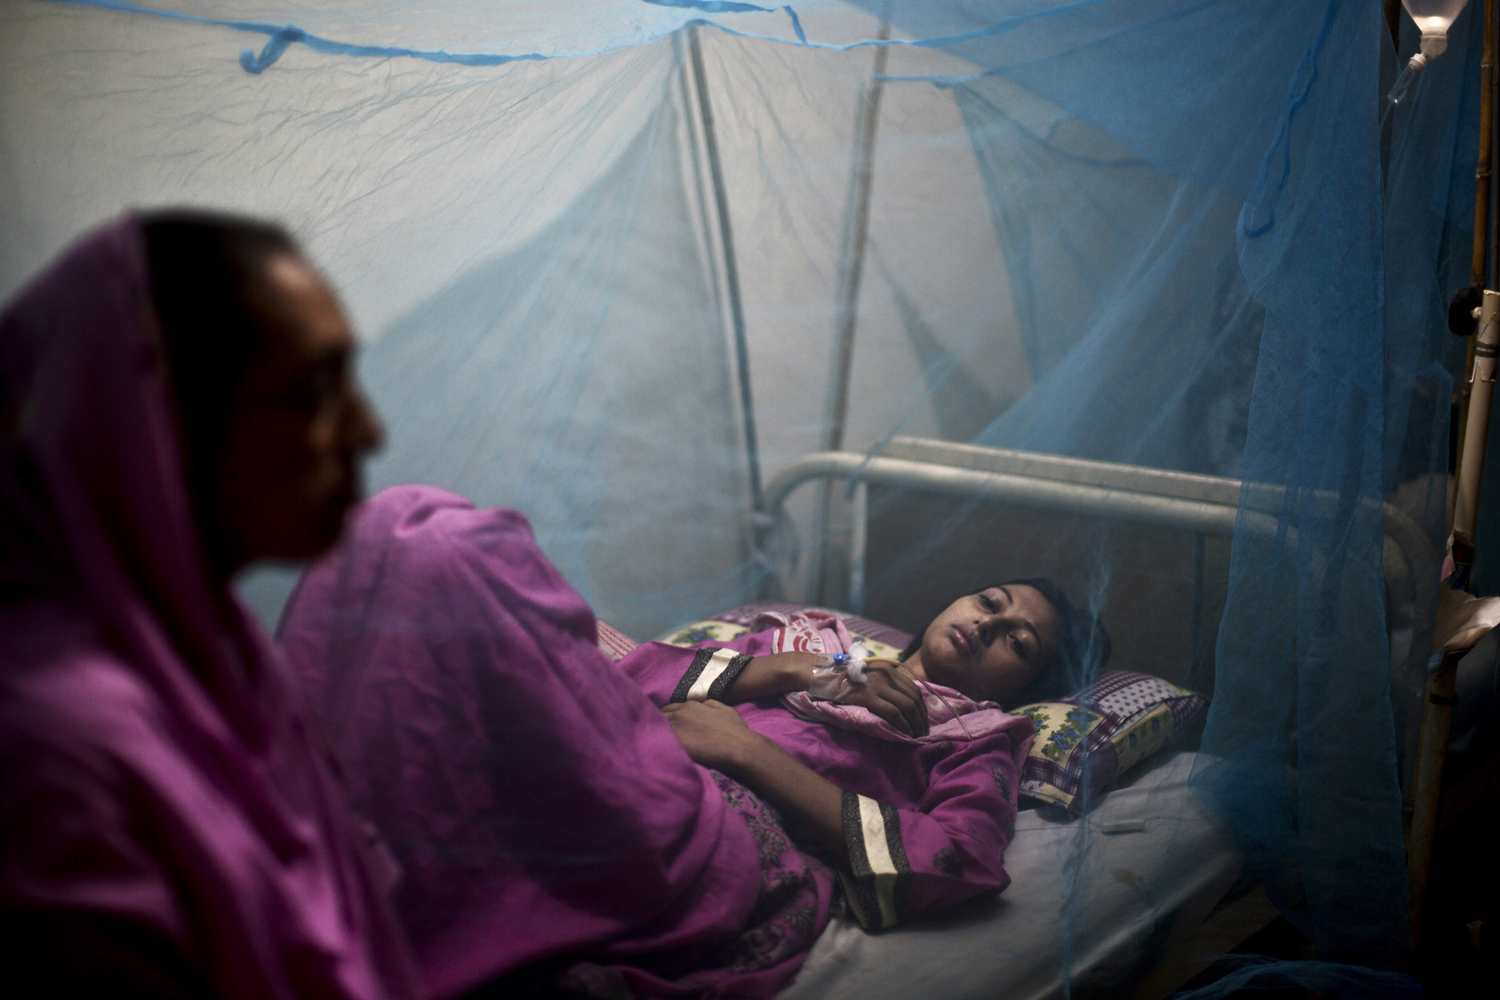 Oct. 24, 2013. A Pakistani woman, looks after her daughter suffering from the mosquito-borne disease, dengue fever, while laying in bed covered with a net at an isolation ward of a hospital in Rawalpindi, Pakistan.